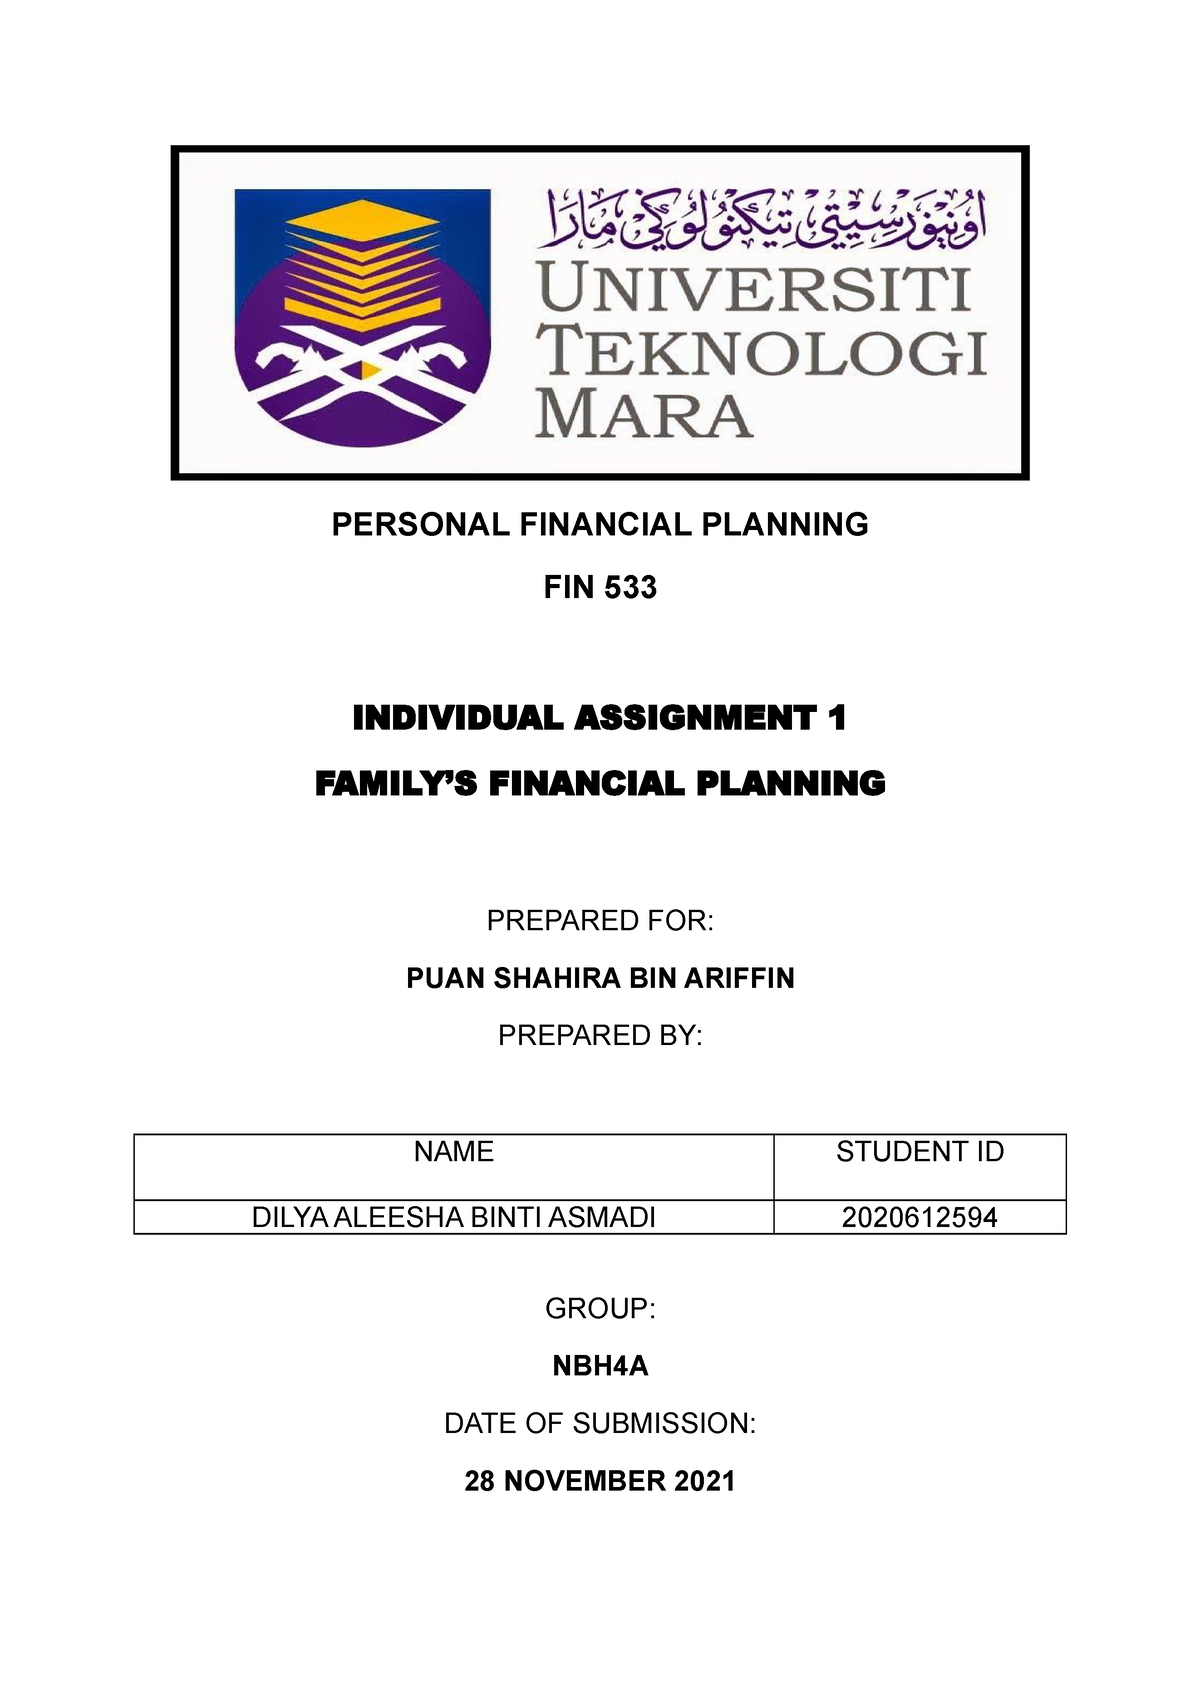 fin533 individual assignment family financial planning